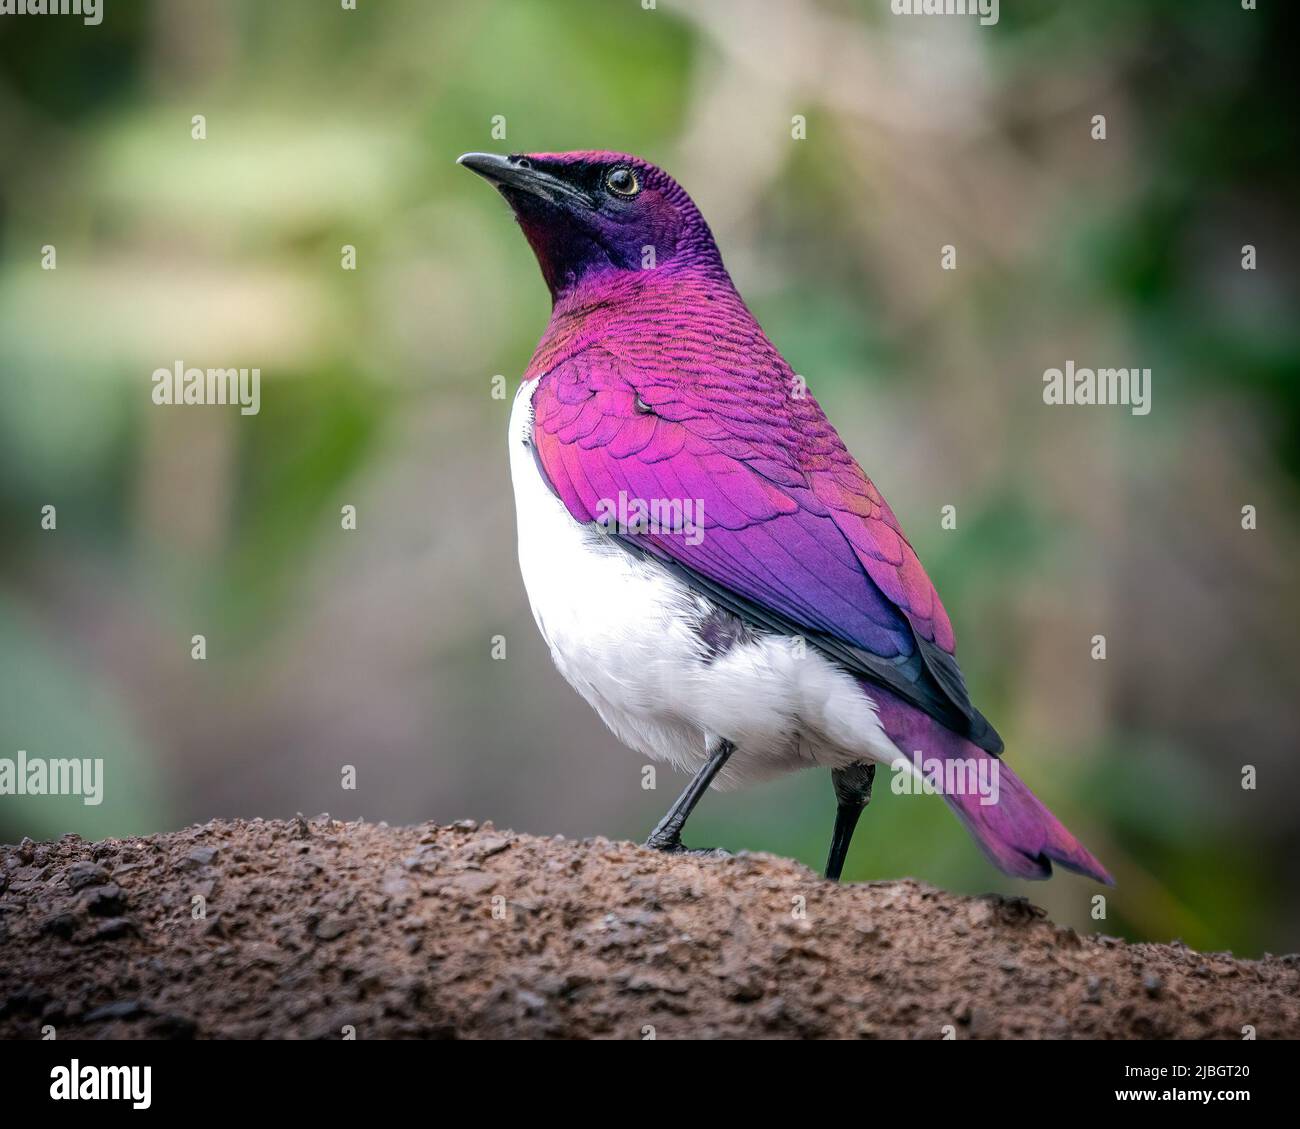 Male violet-backed starling (Cinnyricinclus leucogaster), also known as the plum-coloured starling or amethyst starling.  The male of this sexually di Stock Photo